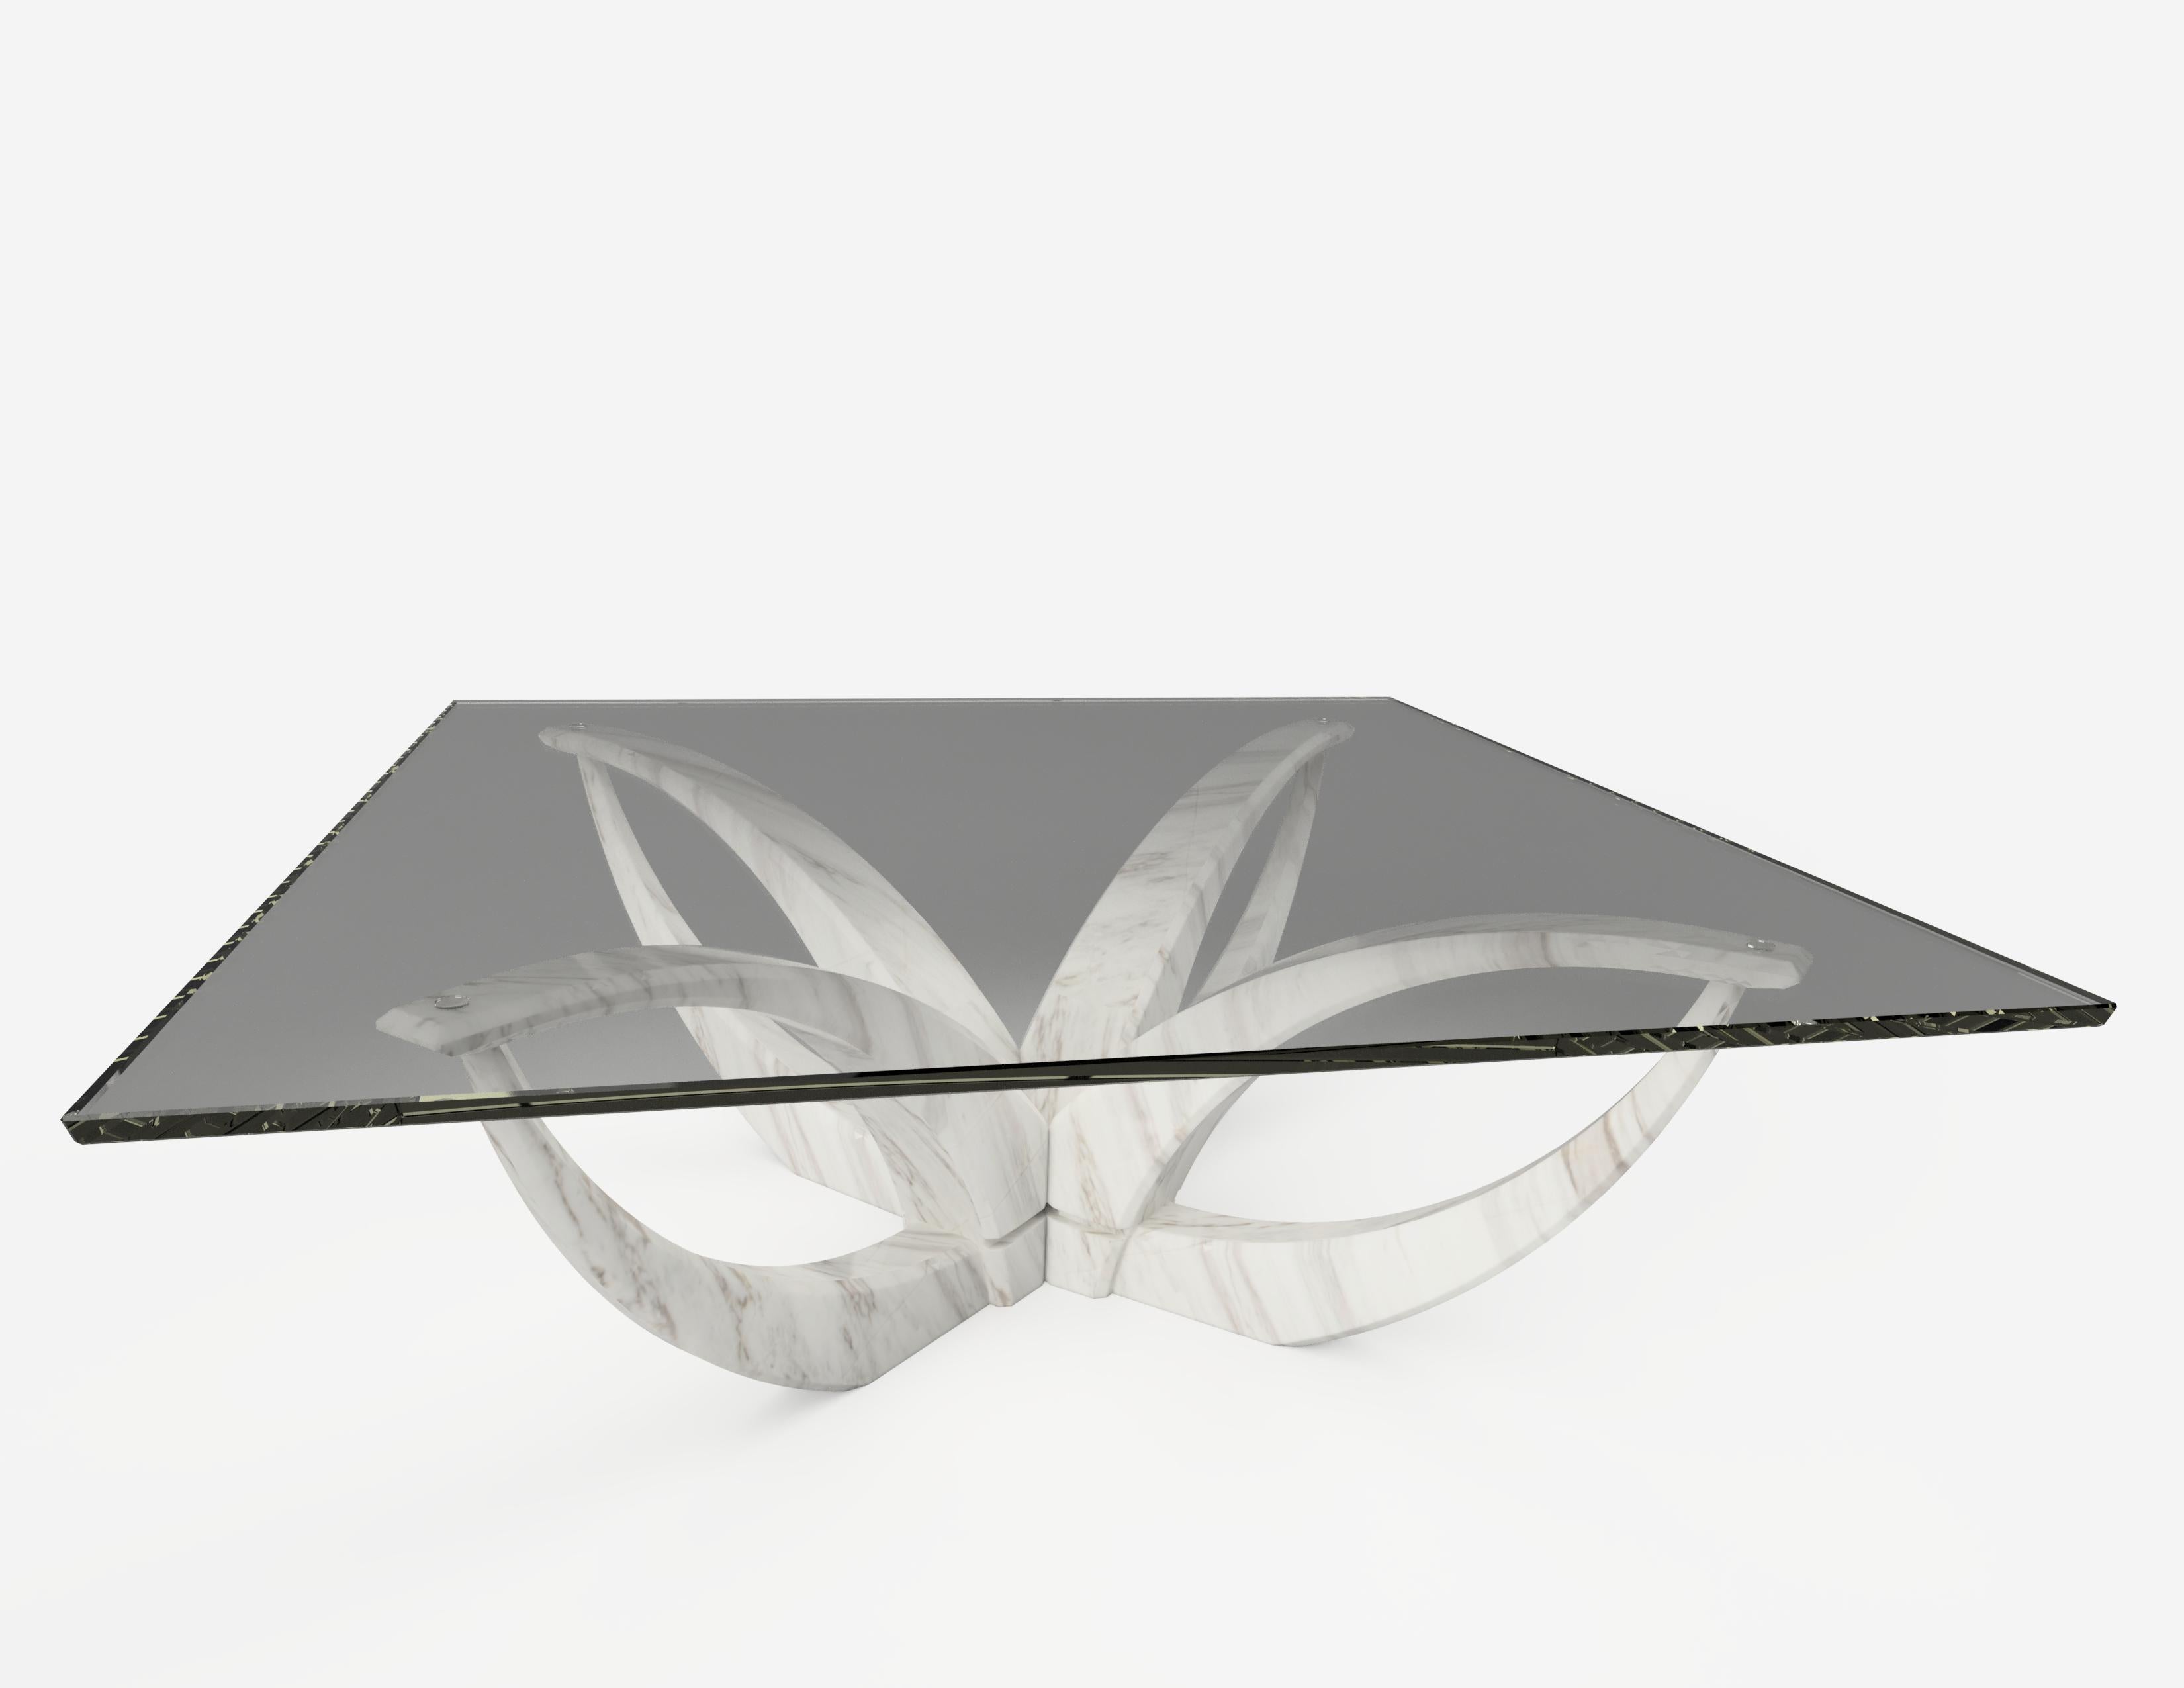 The diamond moon flower center table, 1 of 1 by Grzegorz Majka
Edition 1 of 1
Dimensions: 39.37 x 39.37 x 13.78 in
Materials: smoked glass top. Marble Onyx base. 


The Diamond collection proves that everything is possible. It goes beyond the